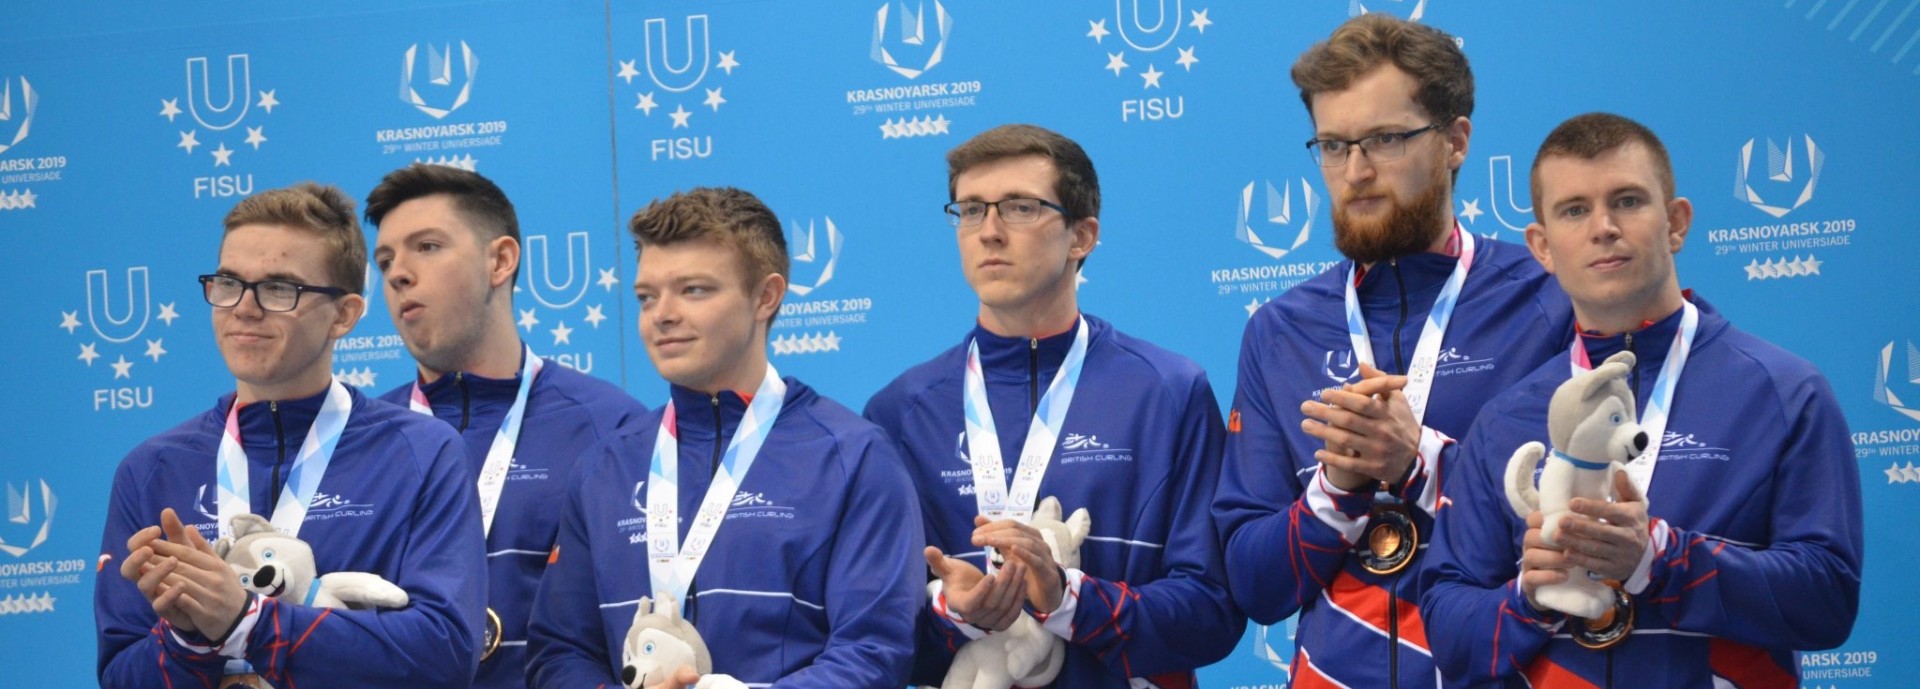 Ross Whyte with curling teammates on podium at World University Winter Games